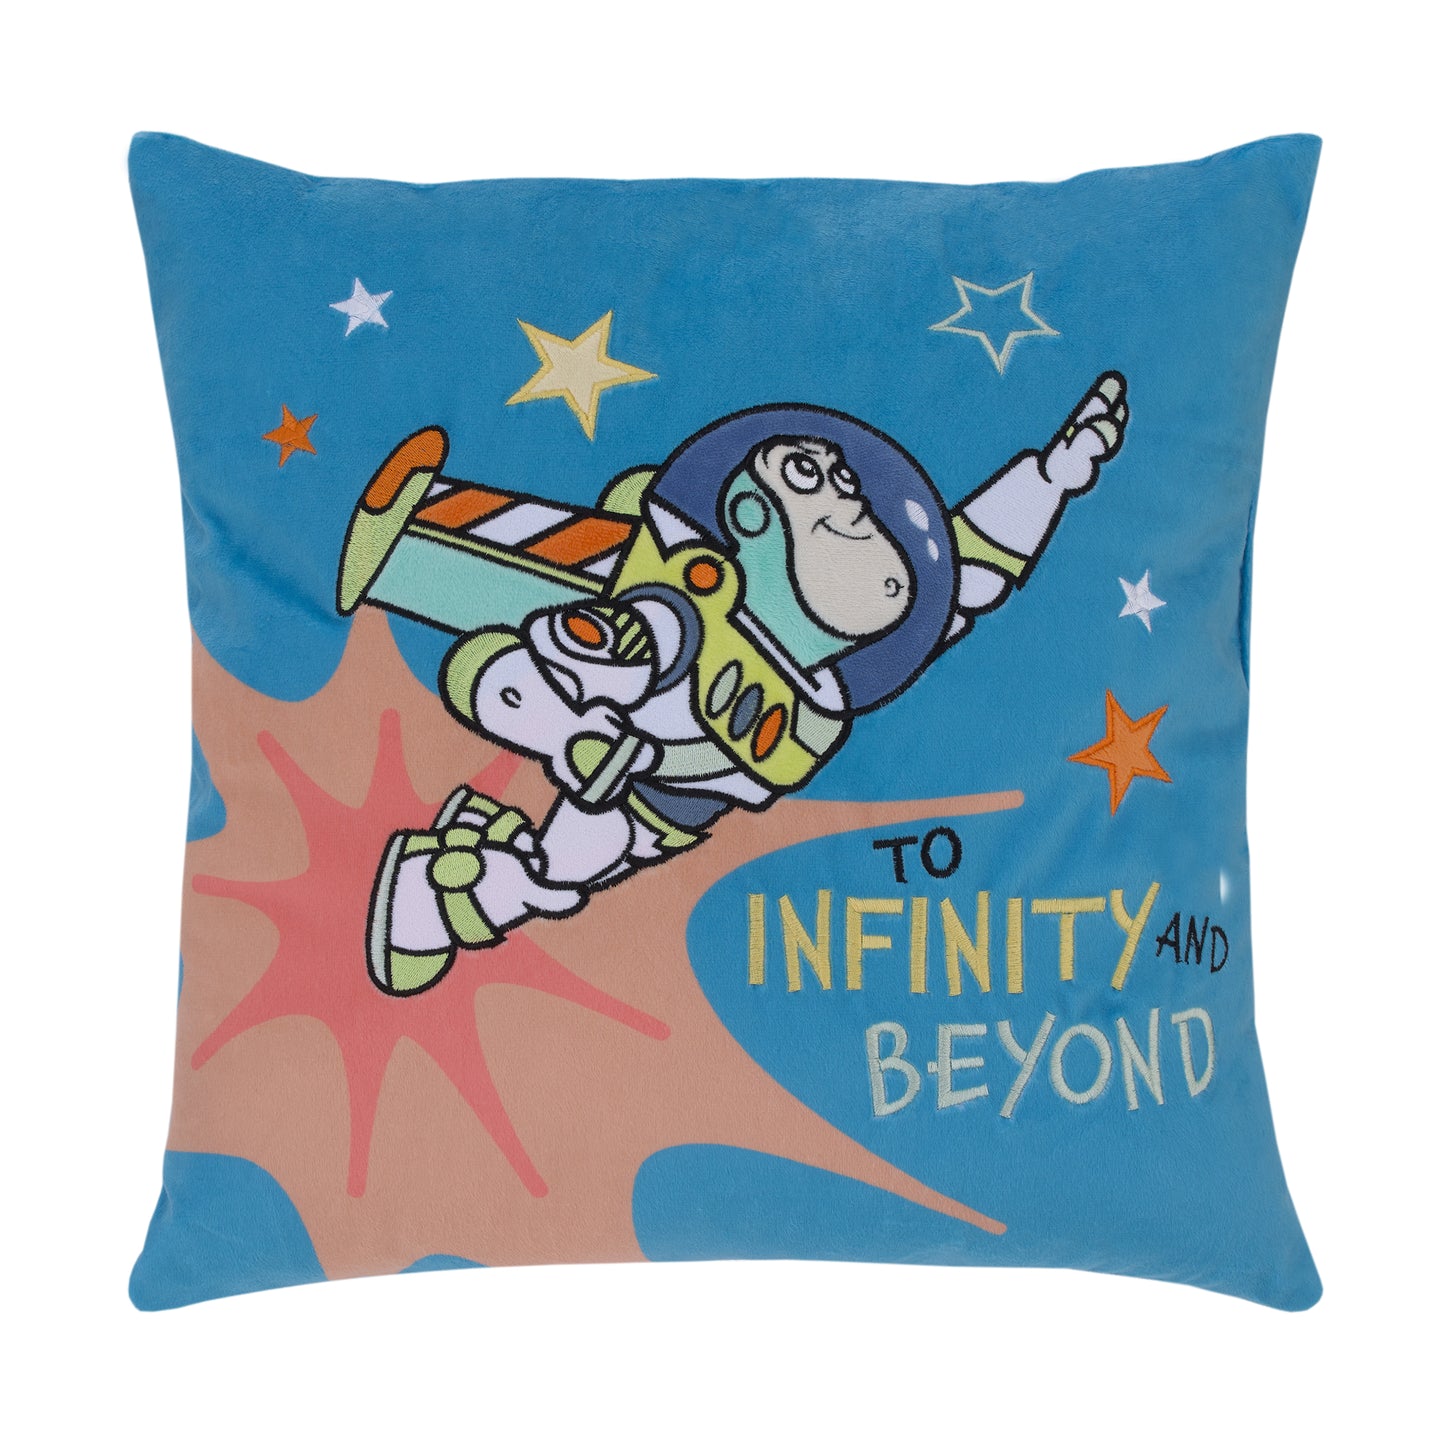 Disney Toy Story Buzz Lightyear Blue, Orange, and Green Blast Off To Infinity and Beyond Plush Decorative Pillow